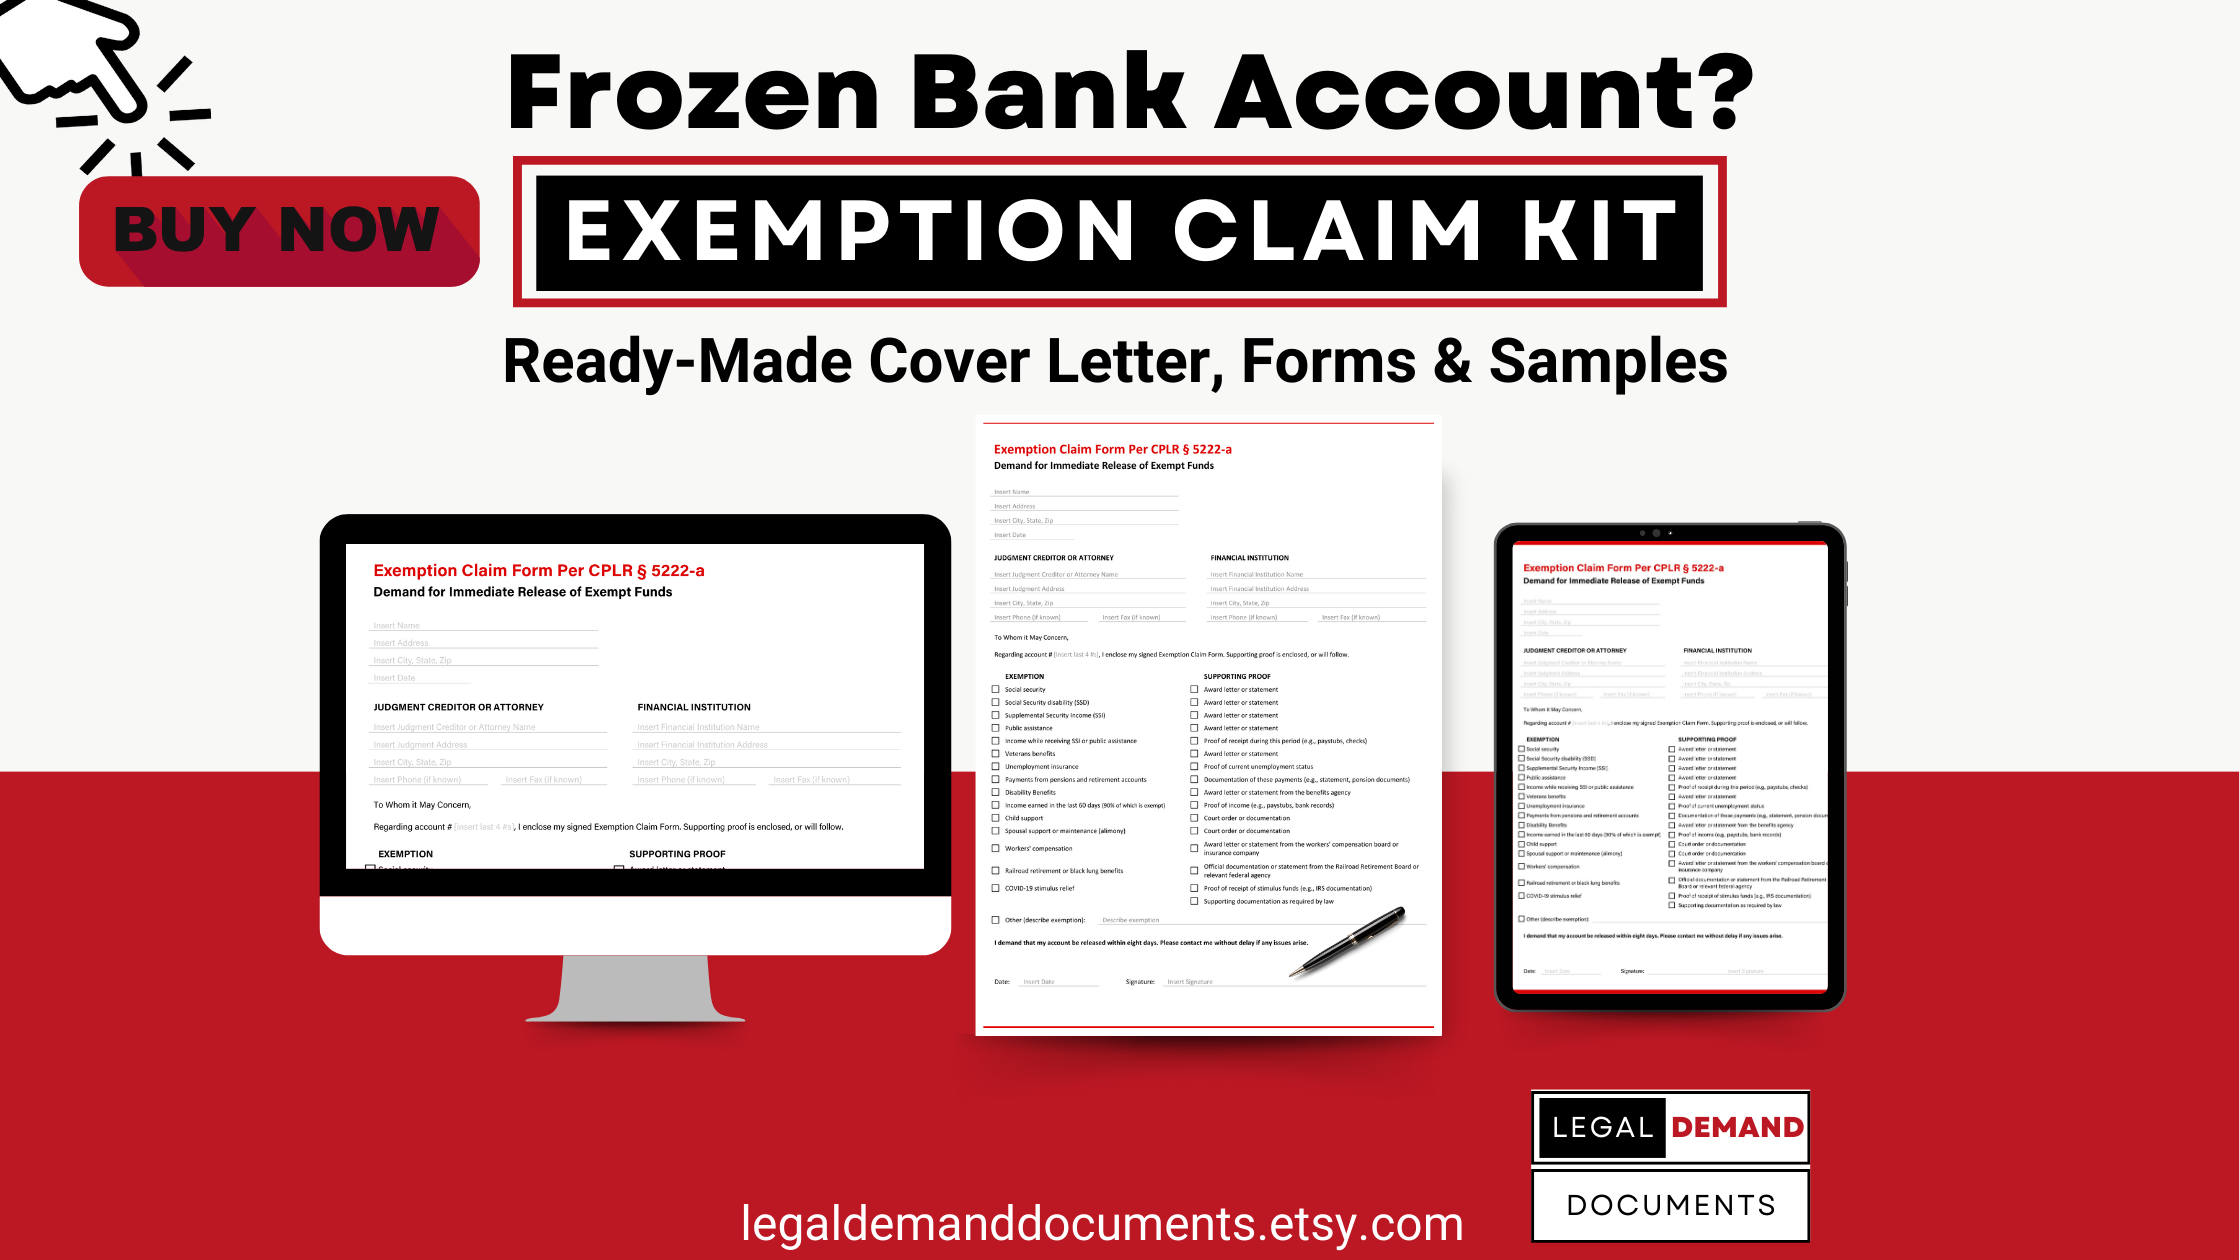 Graphic displays the New York Exemption Claim form as presented by Jesse Langel, Esq., viewable on both a desktop and a laptop screen, illustrating the accessible and user-friendly digital format available for purchase on Etsy for defending against bank restraints.